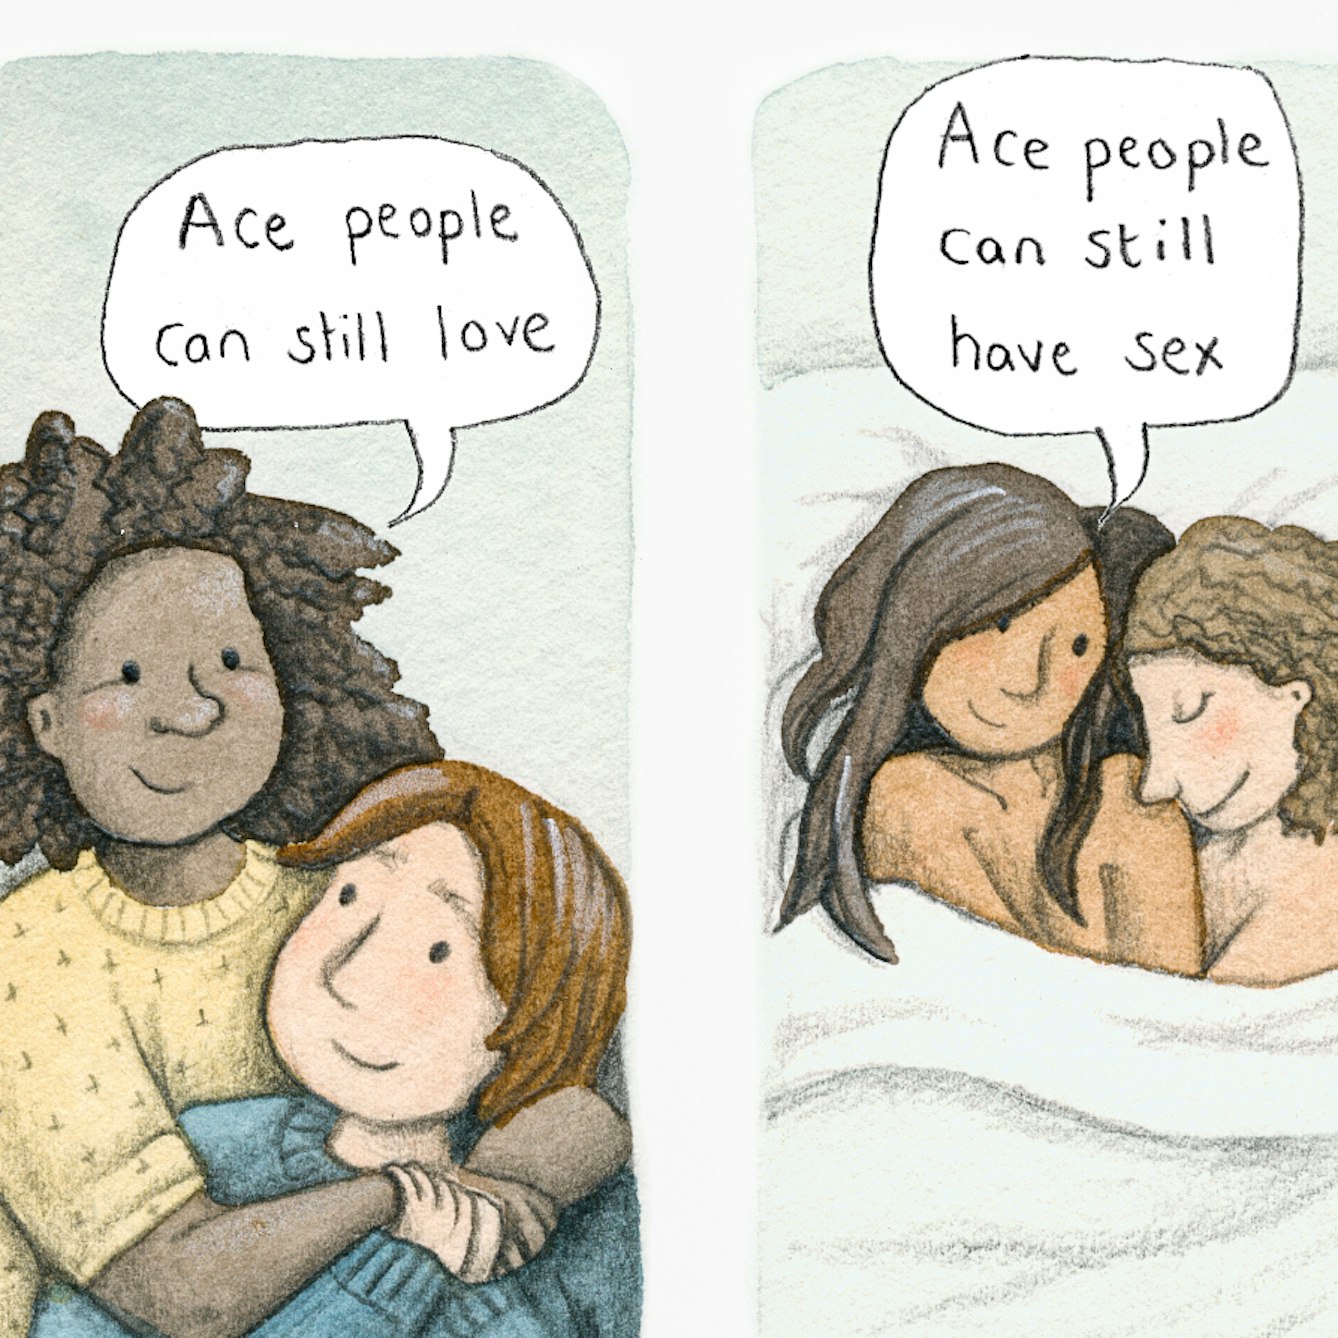 Colourful three panel illustration. 

The first panel shows an illustration of two people hugging, they are both smiling. There is a speech bubble reading 'Ace people can still love'. 

The second panel shows two people naked in bed, smiling at each other. There is a speech bubble reading 'Ace people can still have sex'. 

The third panel shows a person with a child on their back with their arms around their neck. They are smiling at each other. A speech bubble reads 'Ace people can still have children'. 